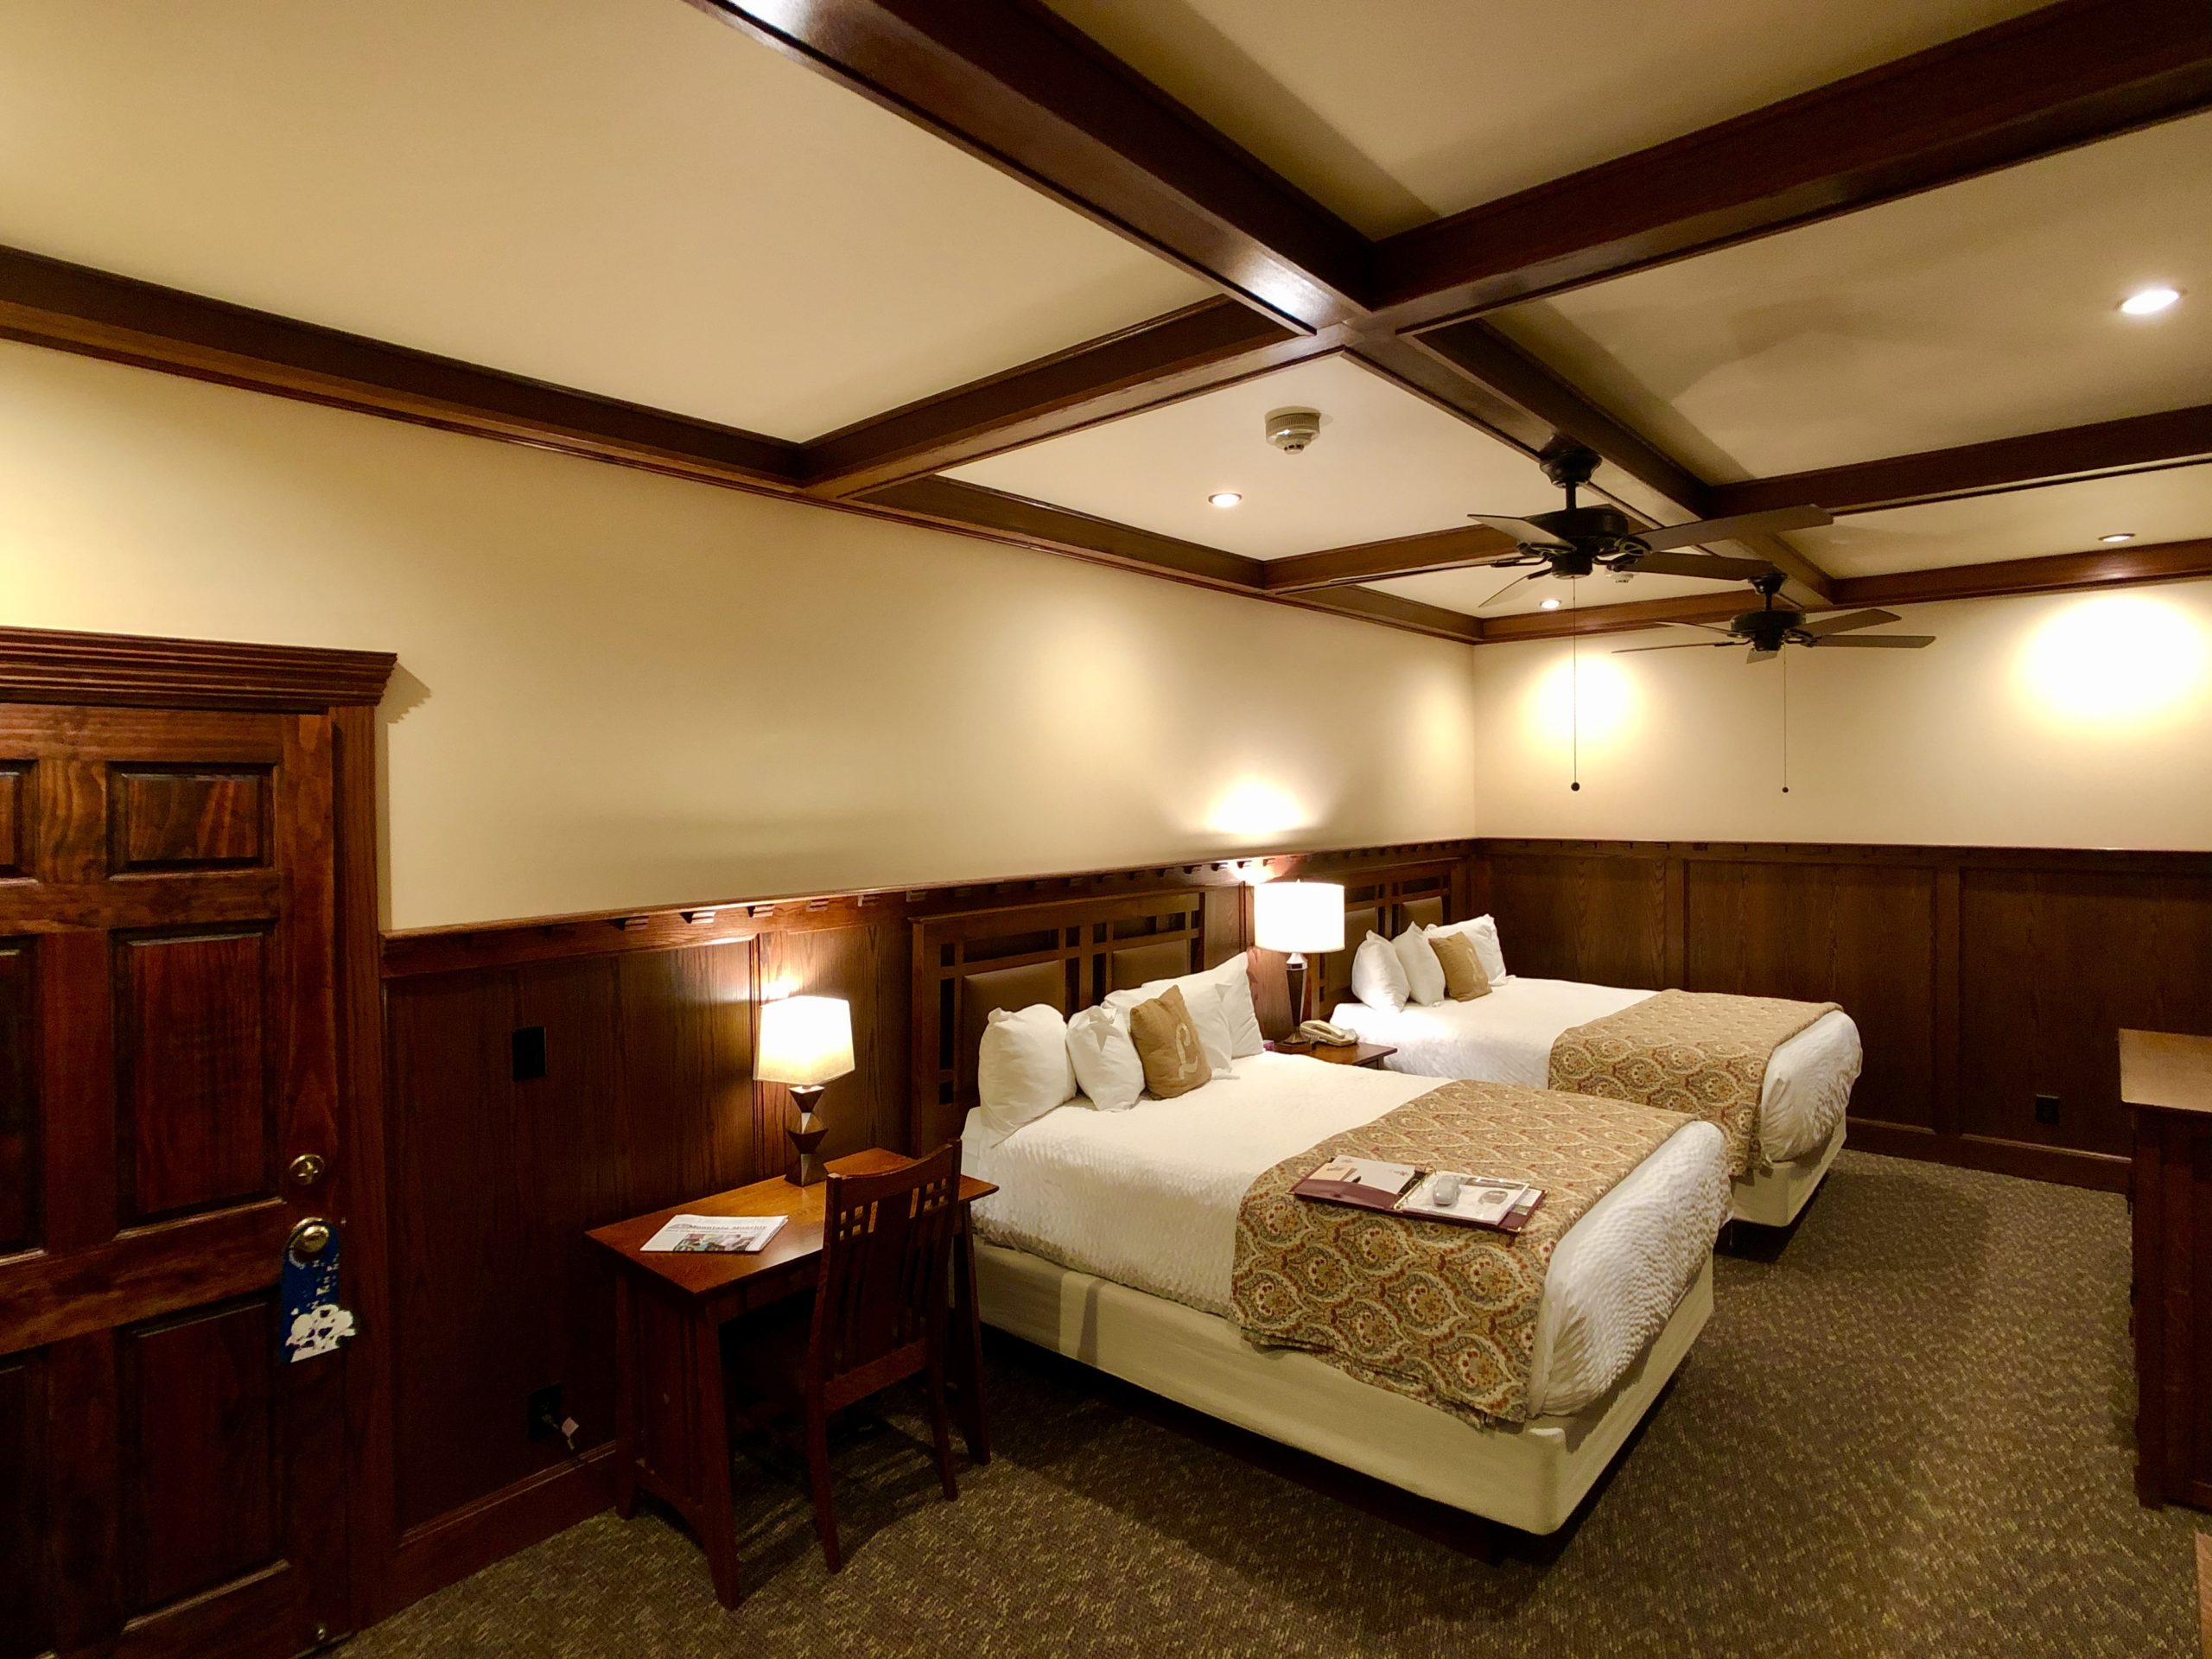 A view of a Double Queen Platinum Room facing the beds.